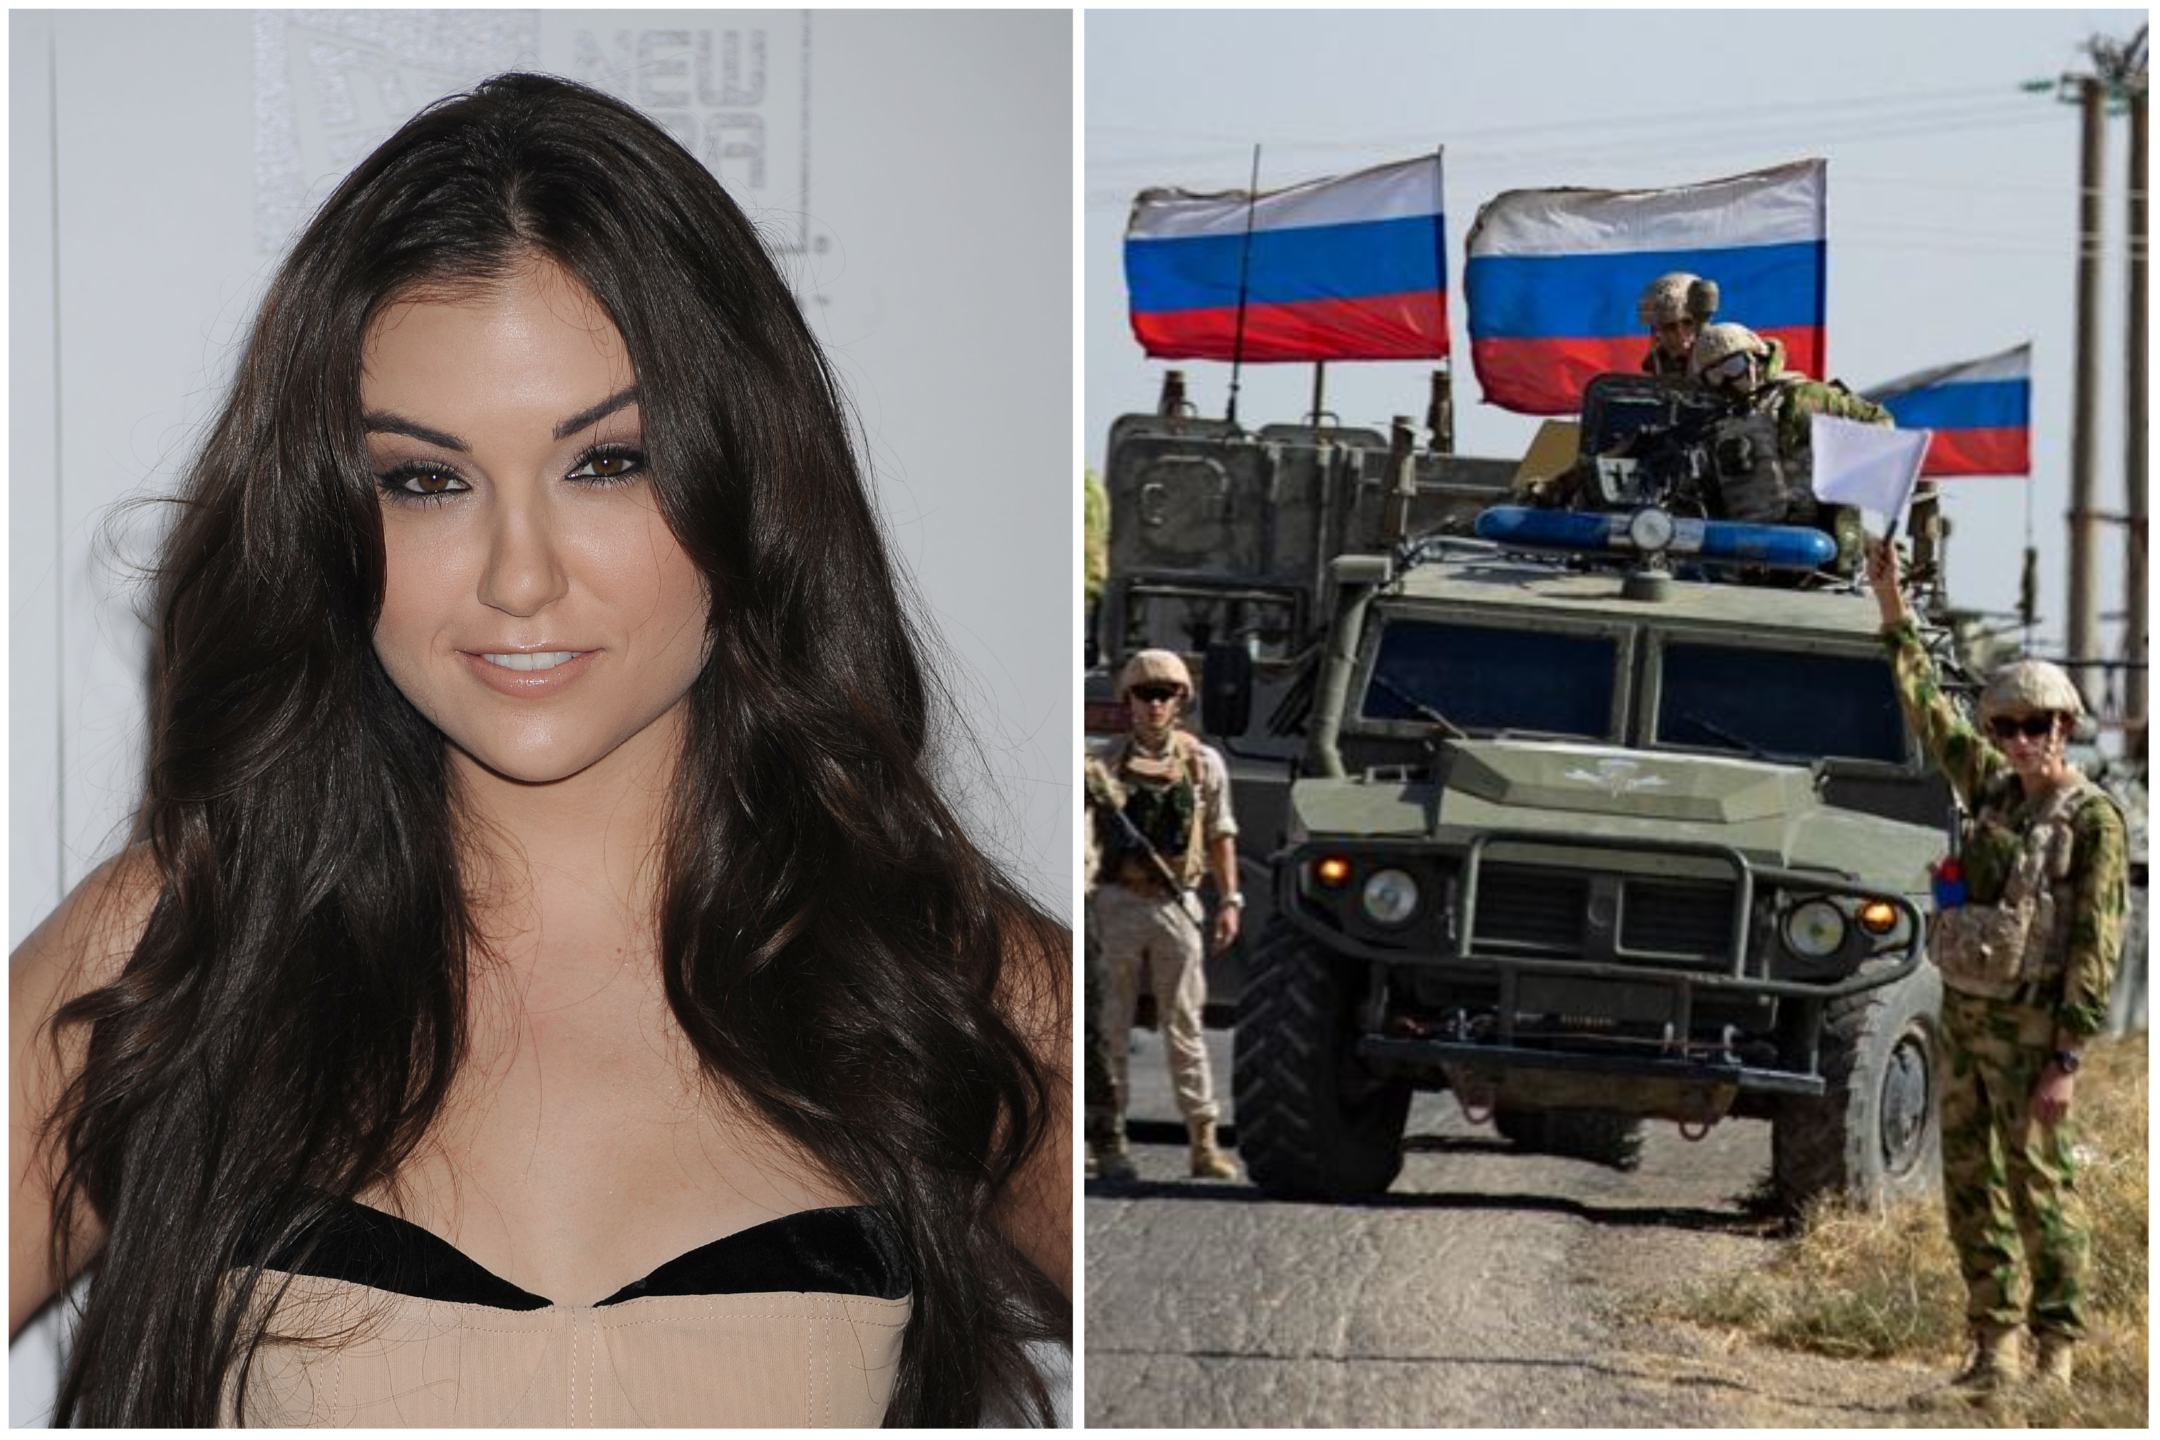 Fact Check Was Ex-Adult Film Star Sasha Grey in Russian Military Promo? image